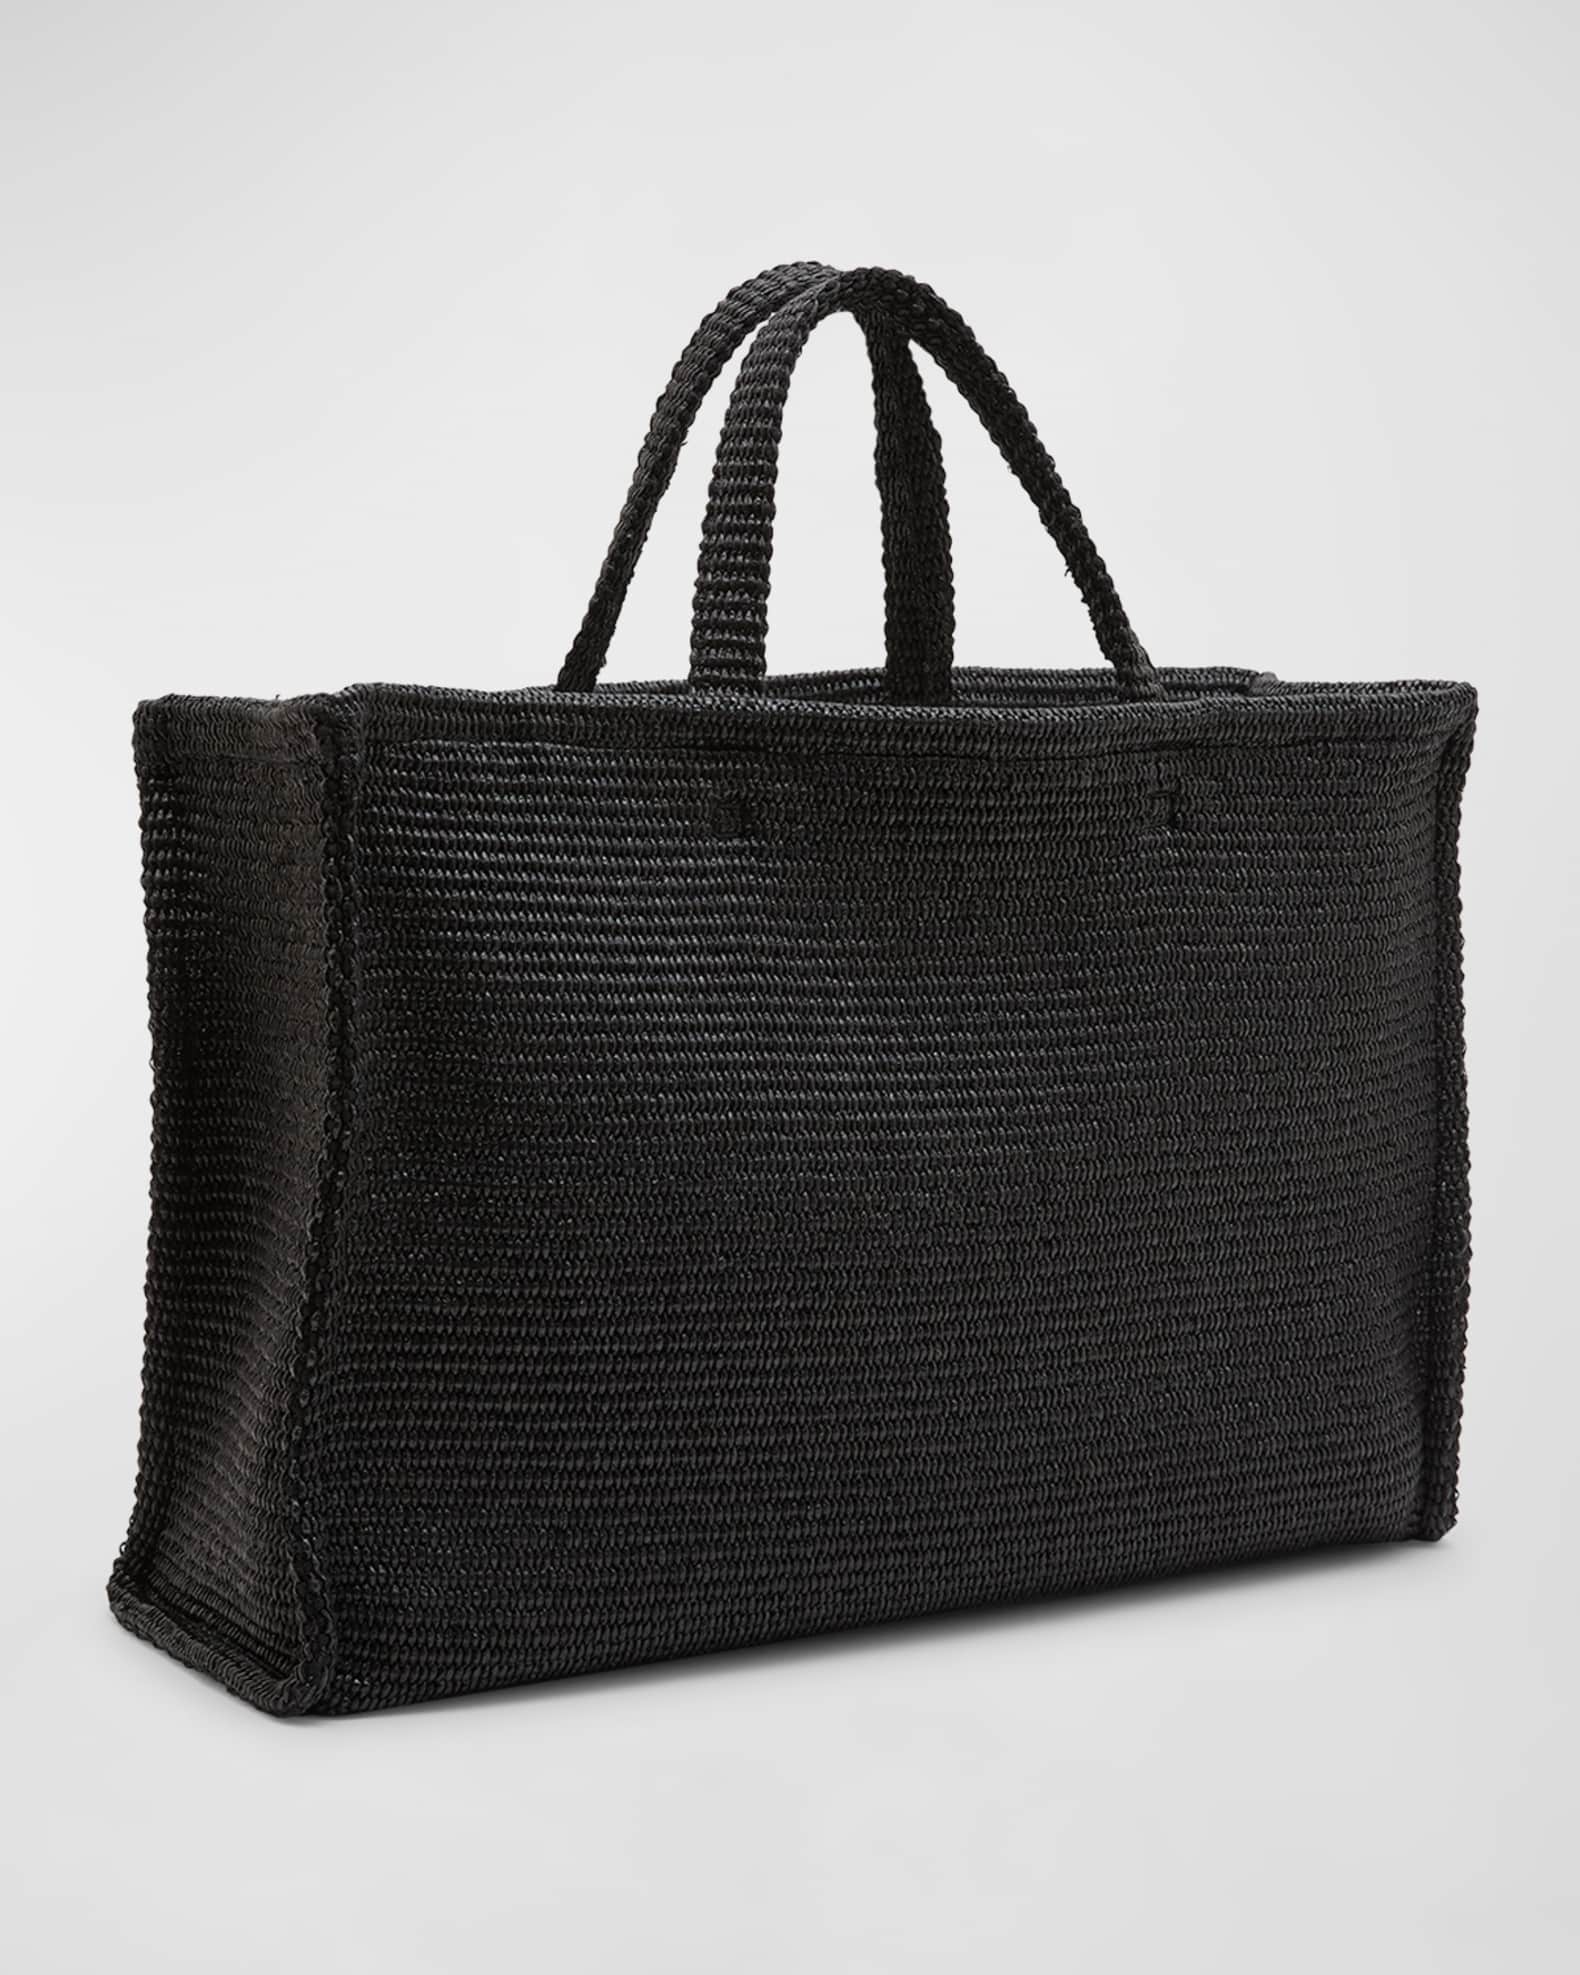 Givenchy Large G Tote Logo Shopping Bag in Raffia | Neiman Marcus